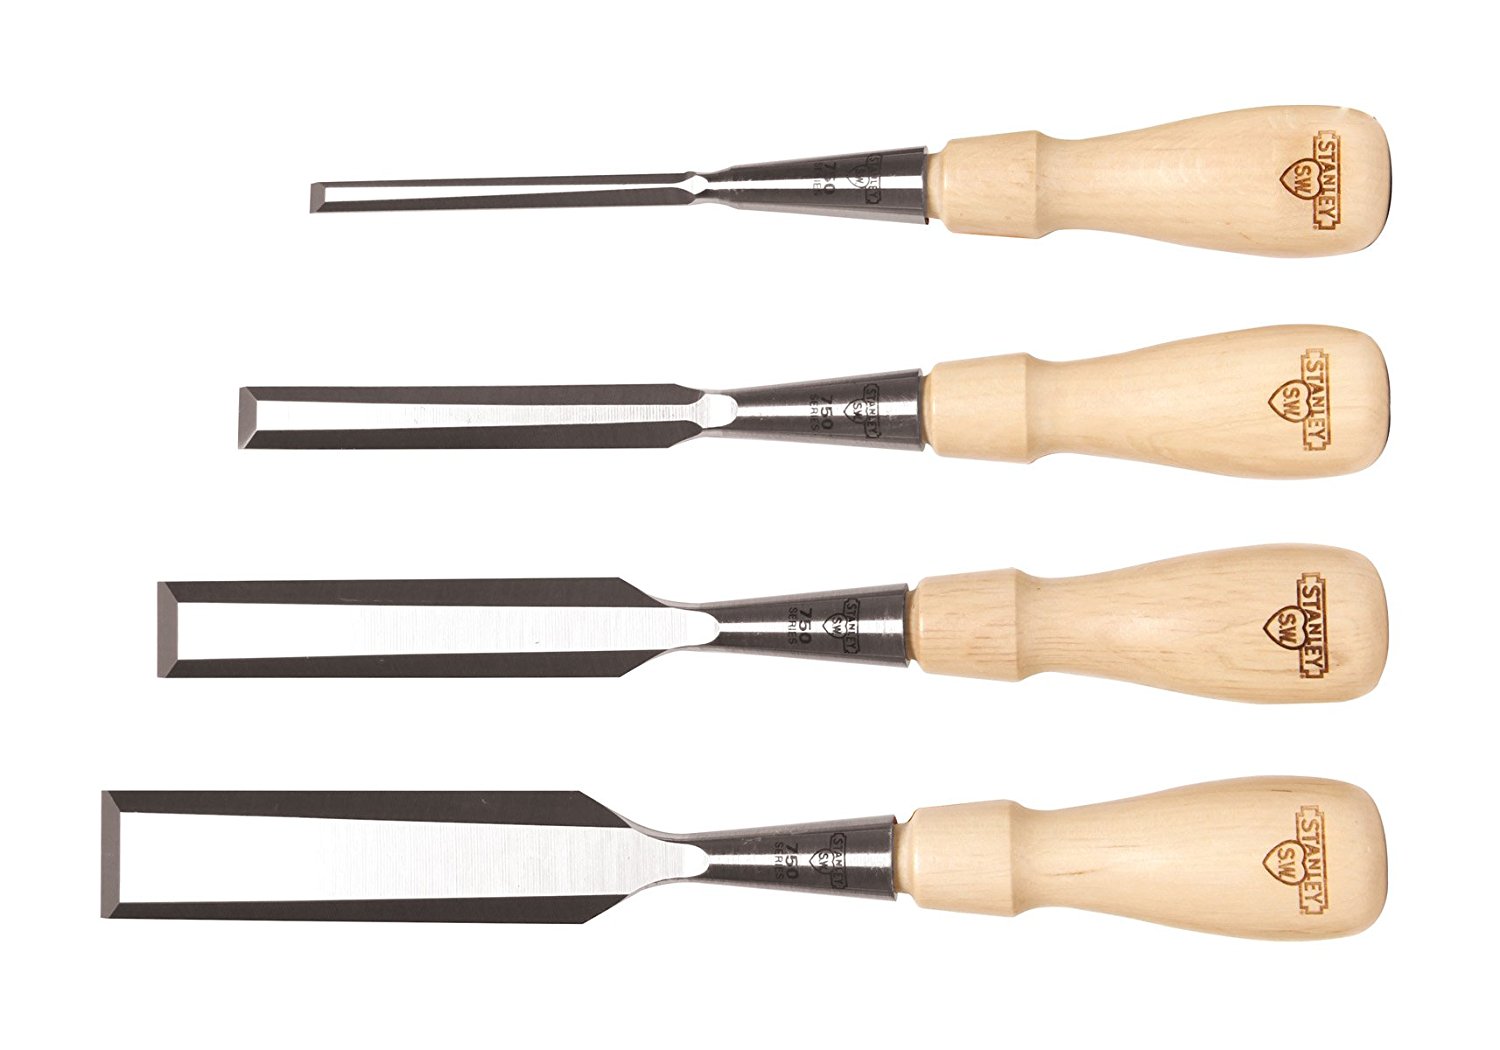 10 Best Chisel Sets For Your Professional Use